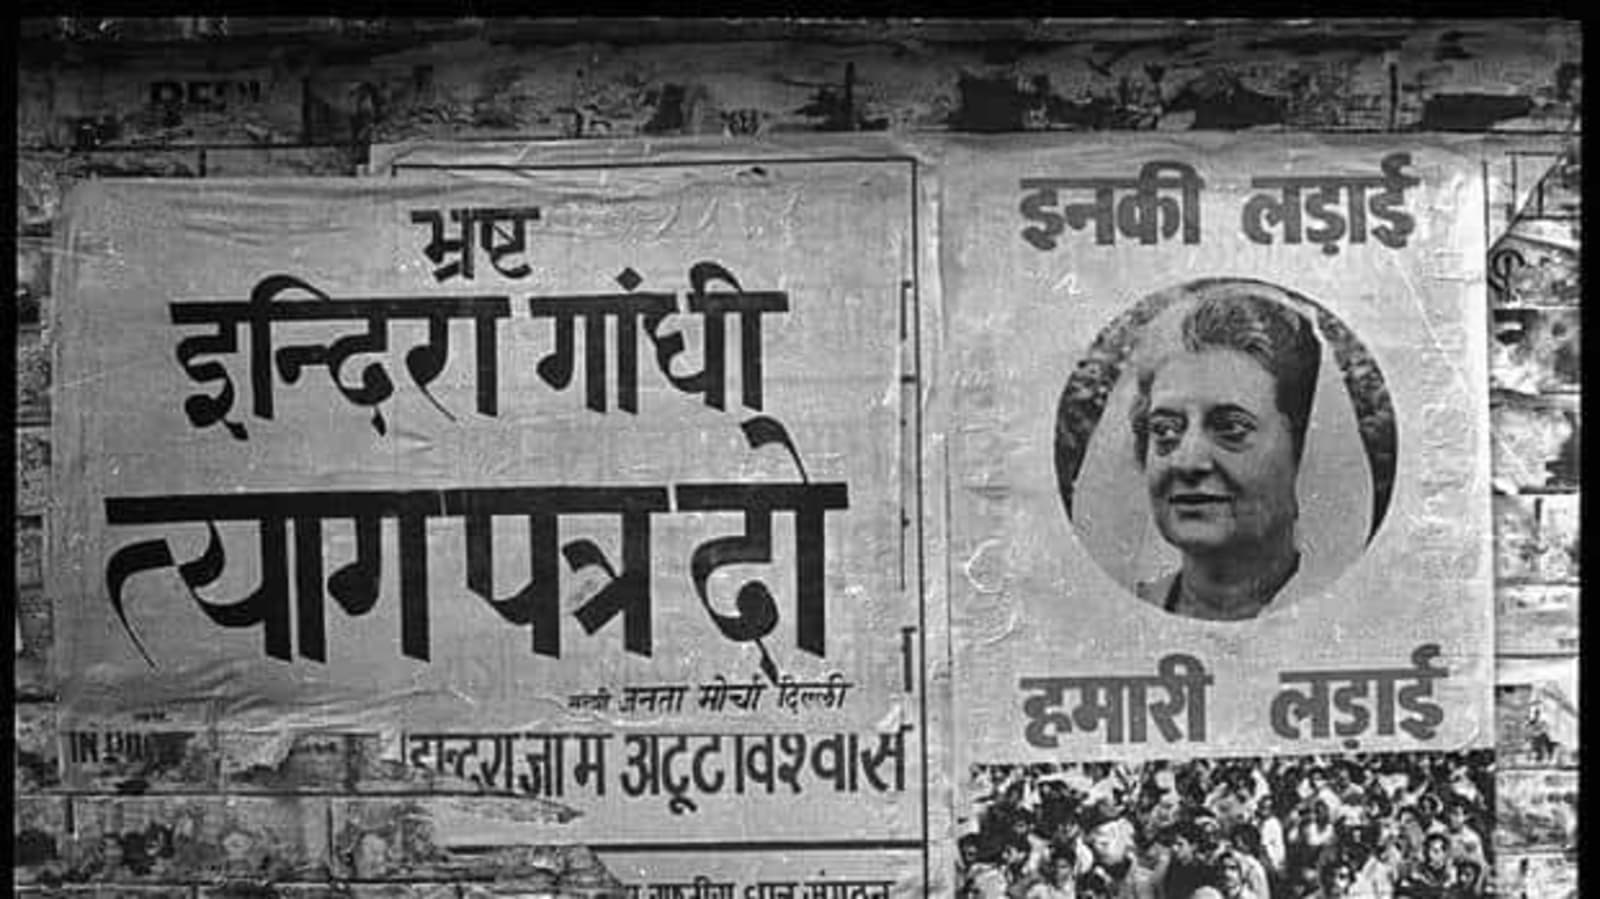 June 25 On this day in 1975, Indira Gandhi imposed the Emergency. What